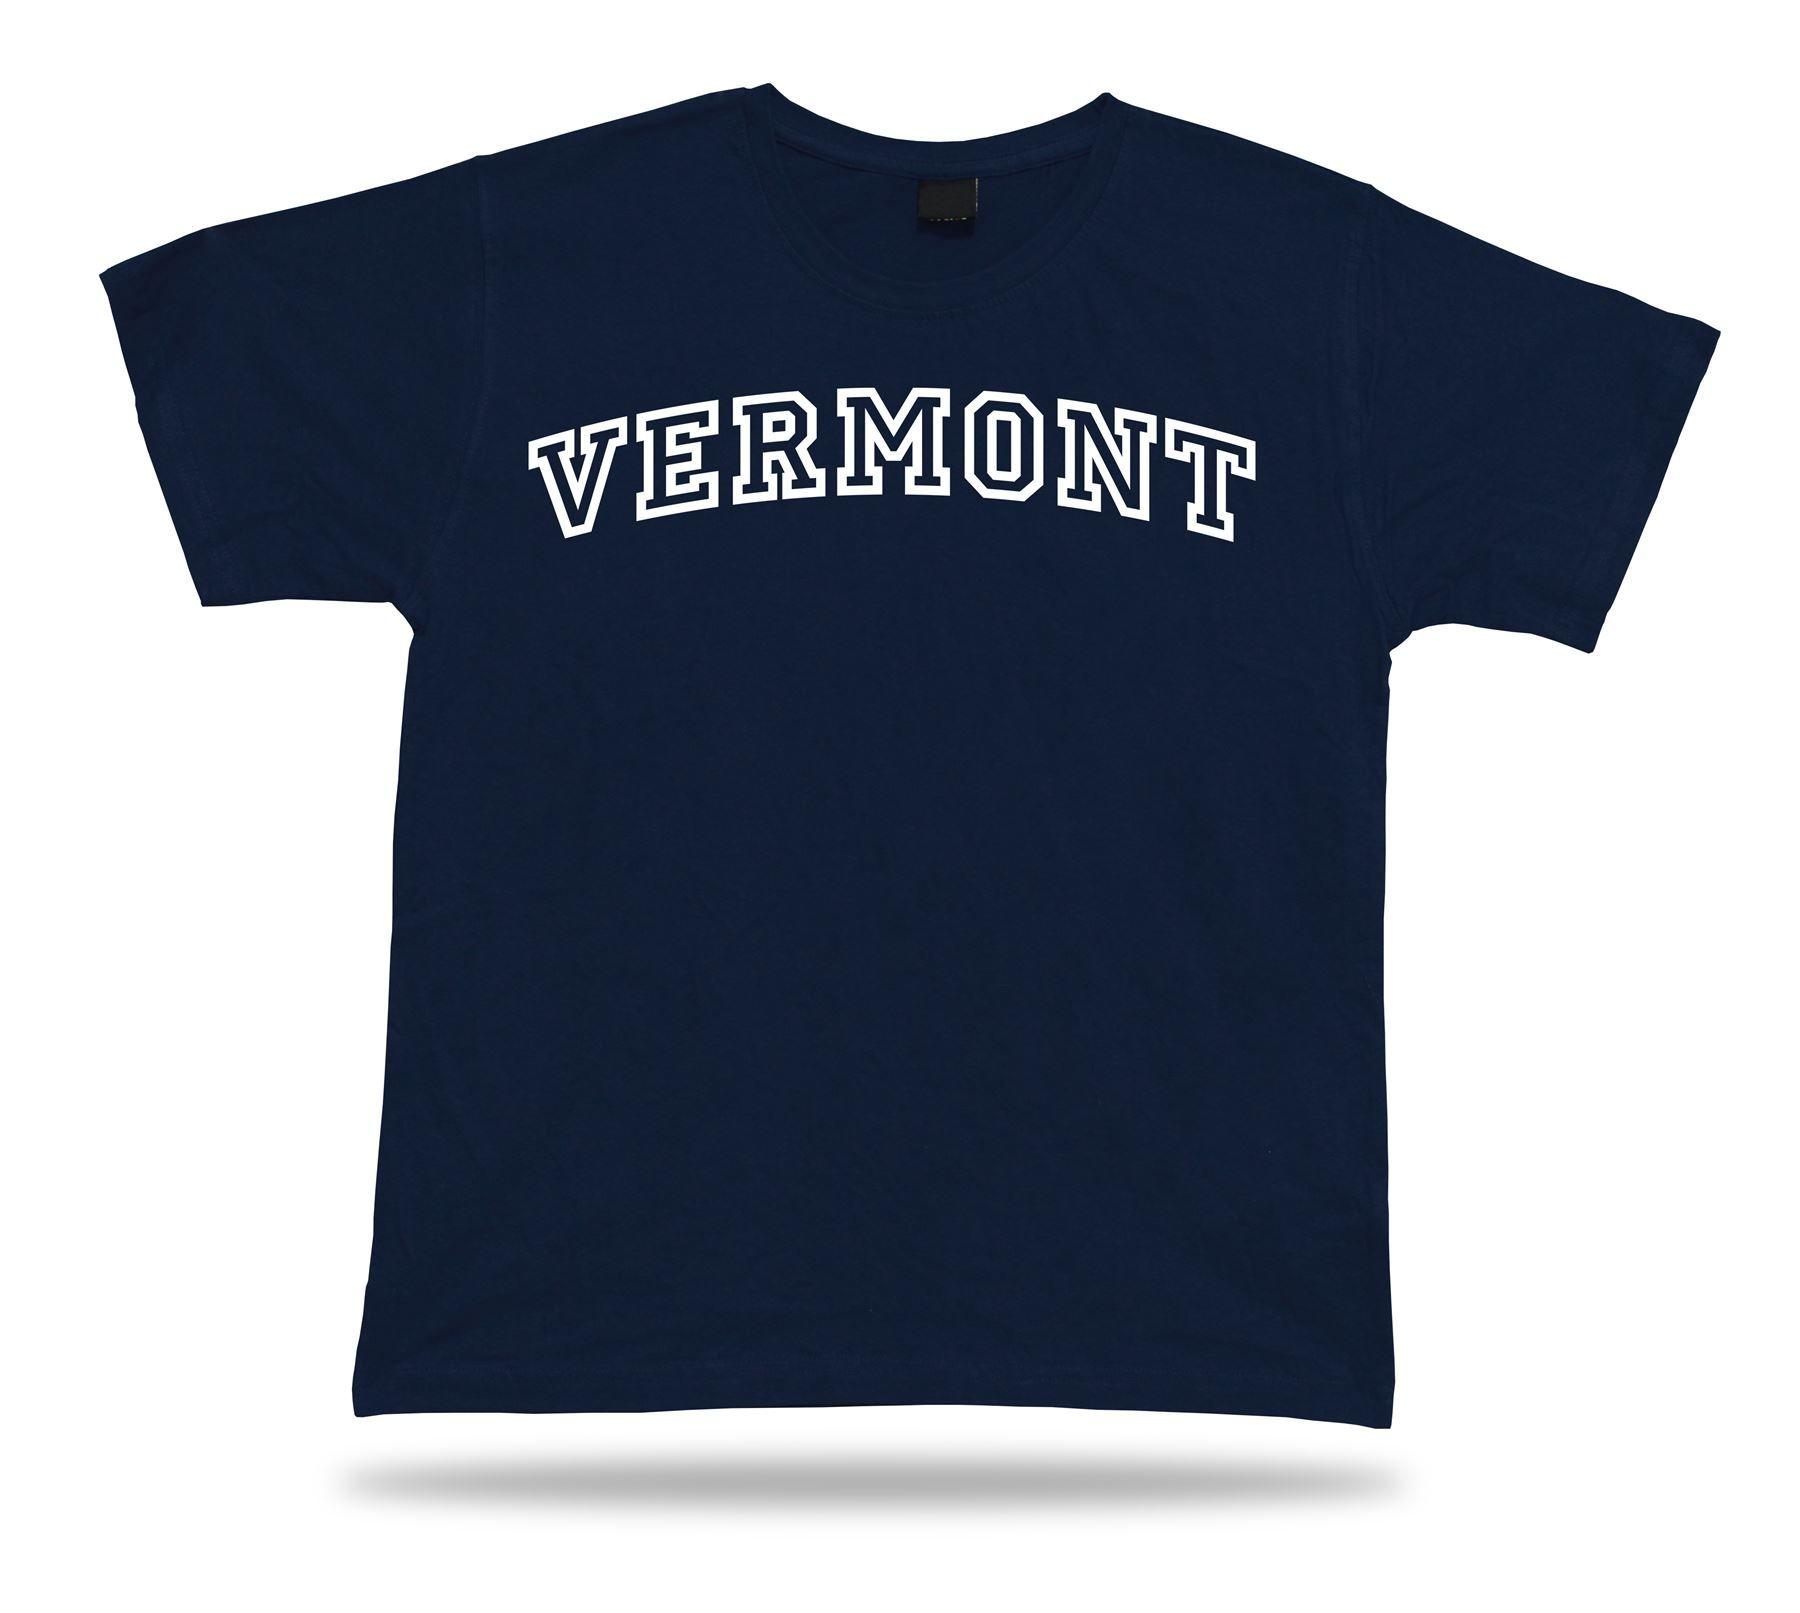 Green Clothing and Apparel Logo - Vermont Green Mountain State VT T Shirt Top Fashion Modern Apparel